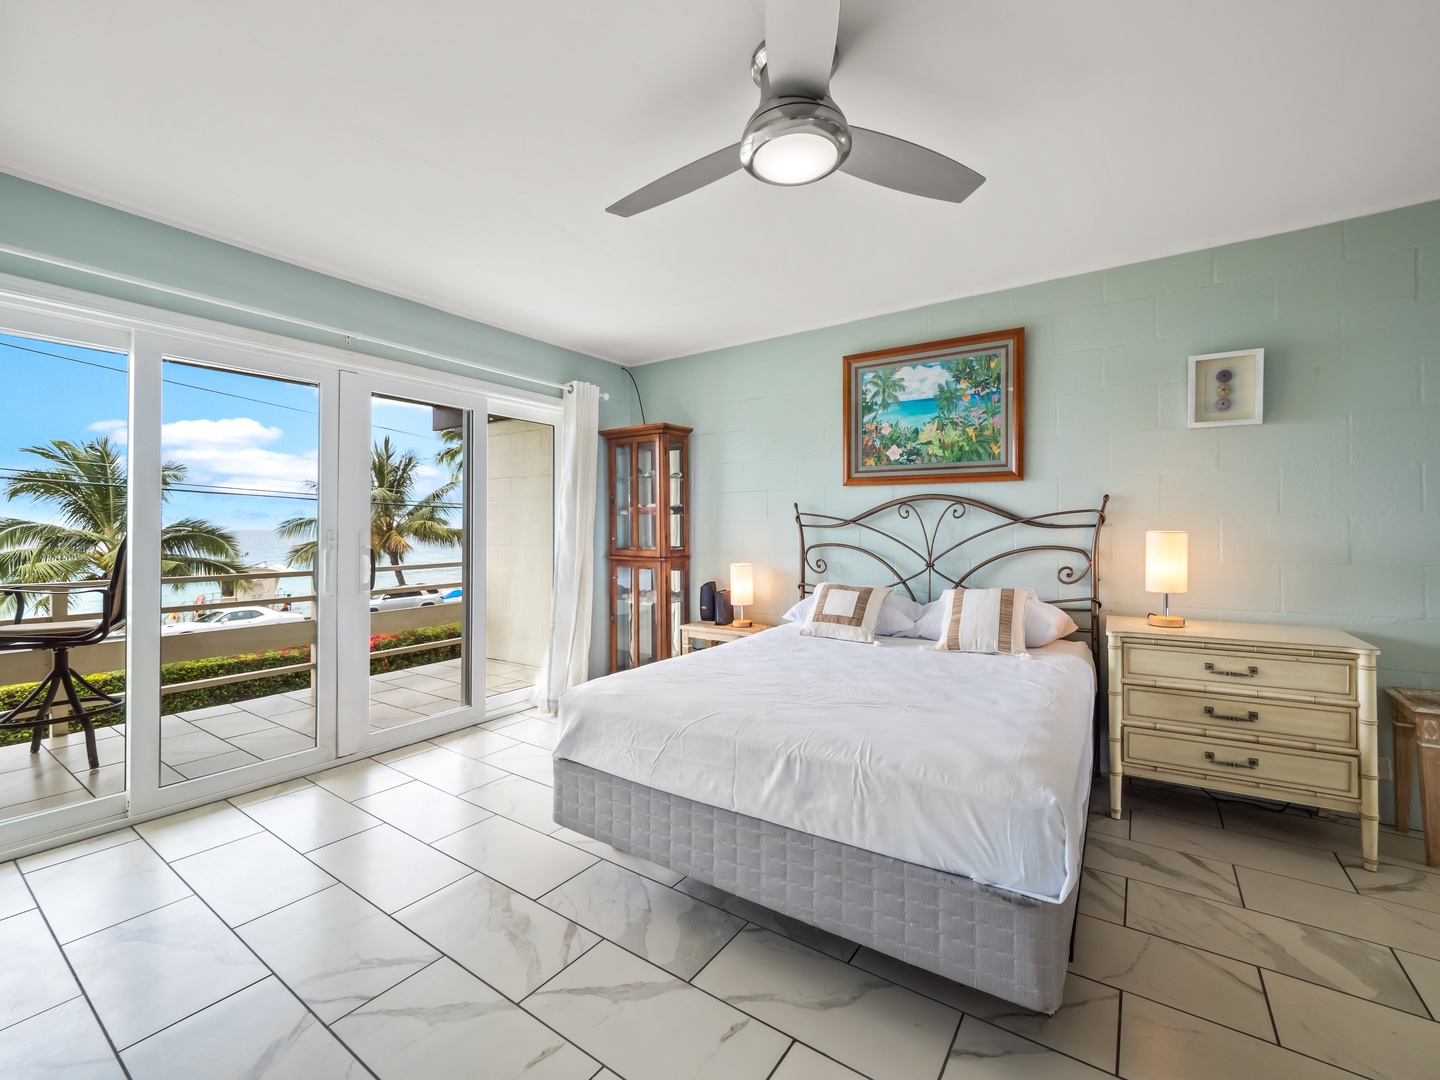 Studio apartment with stunning ocean view, lanai, and Smart TV